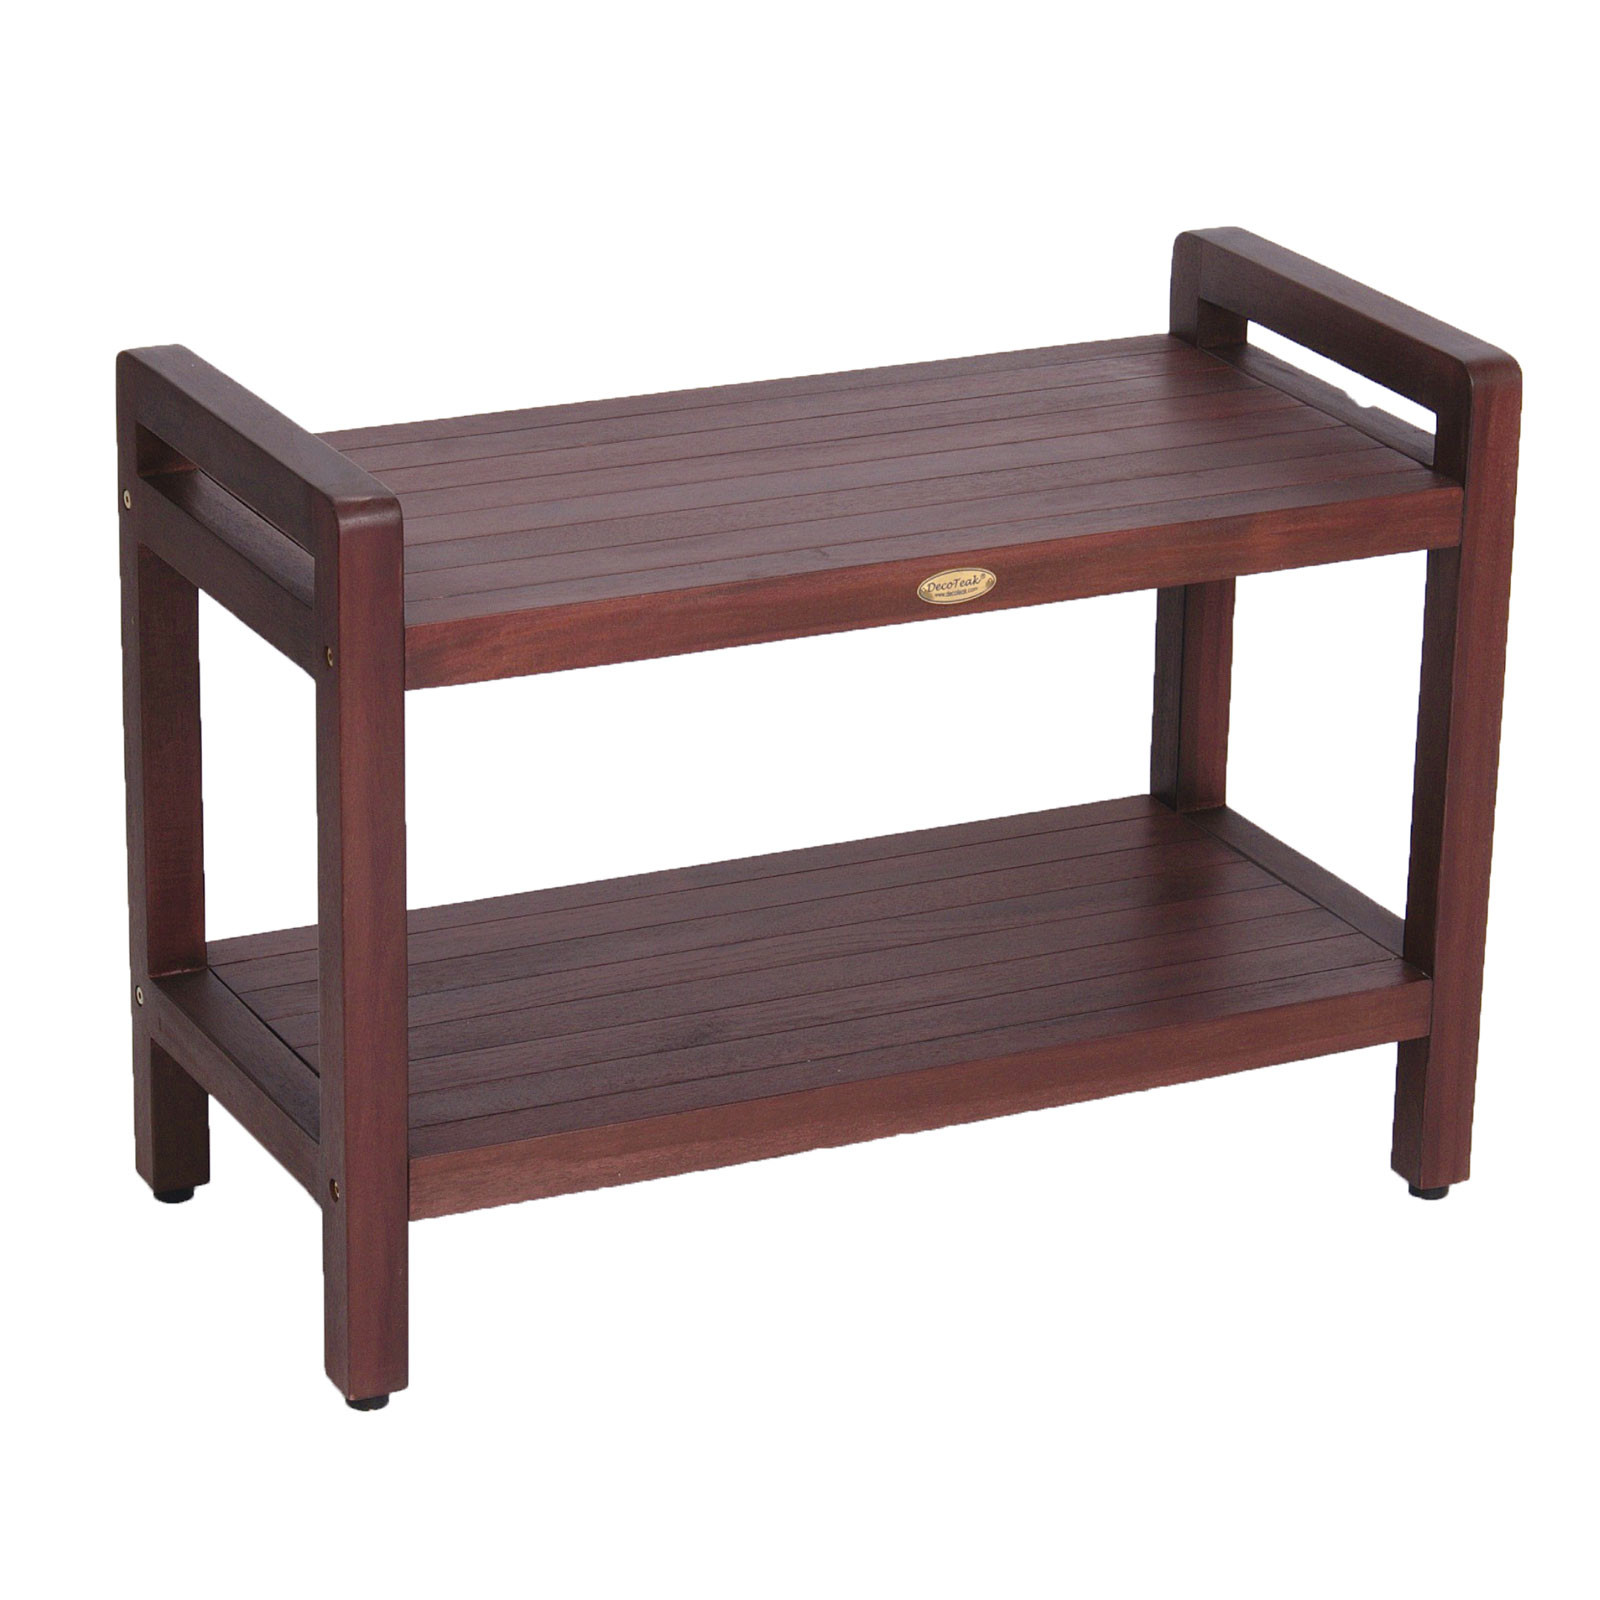 DT174 29" Classic Teak Extended Shower Bench with Shelf and Arms